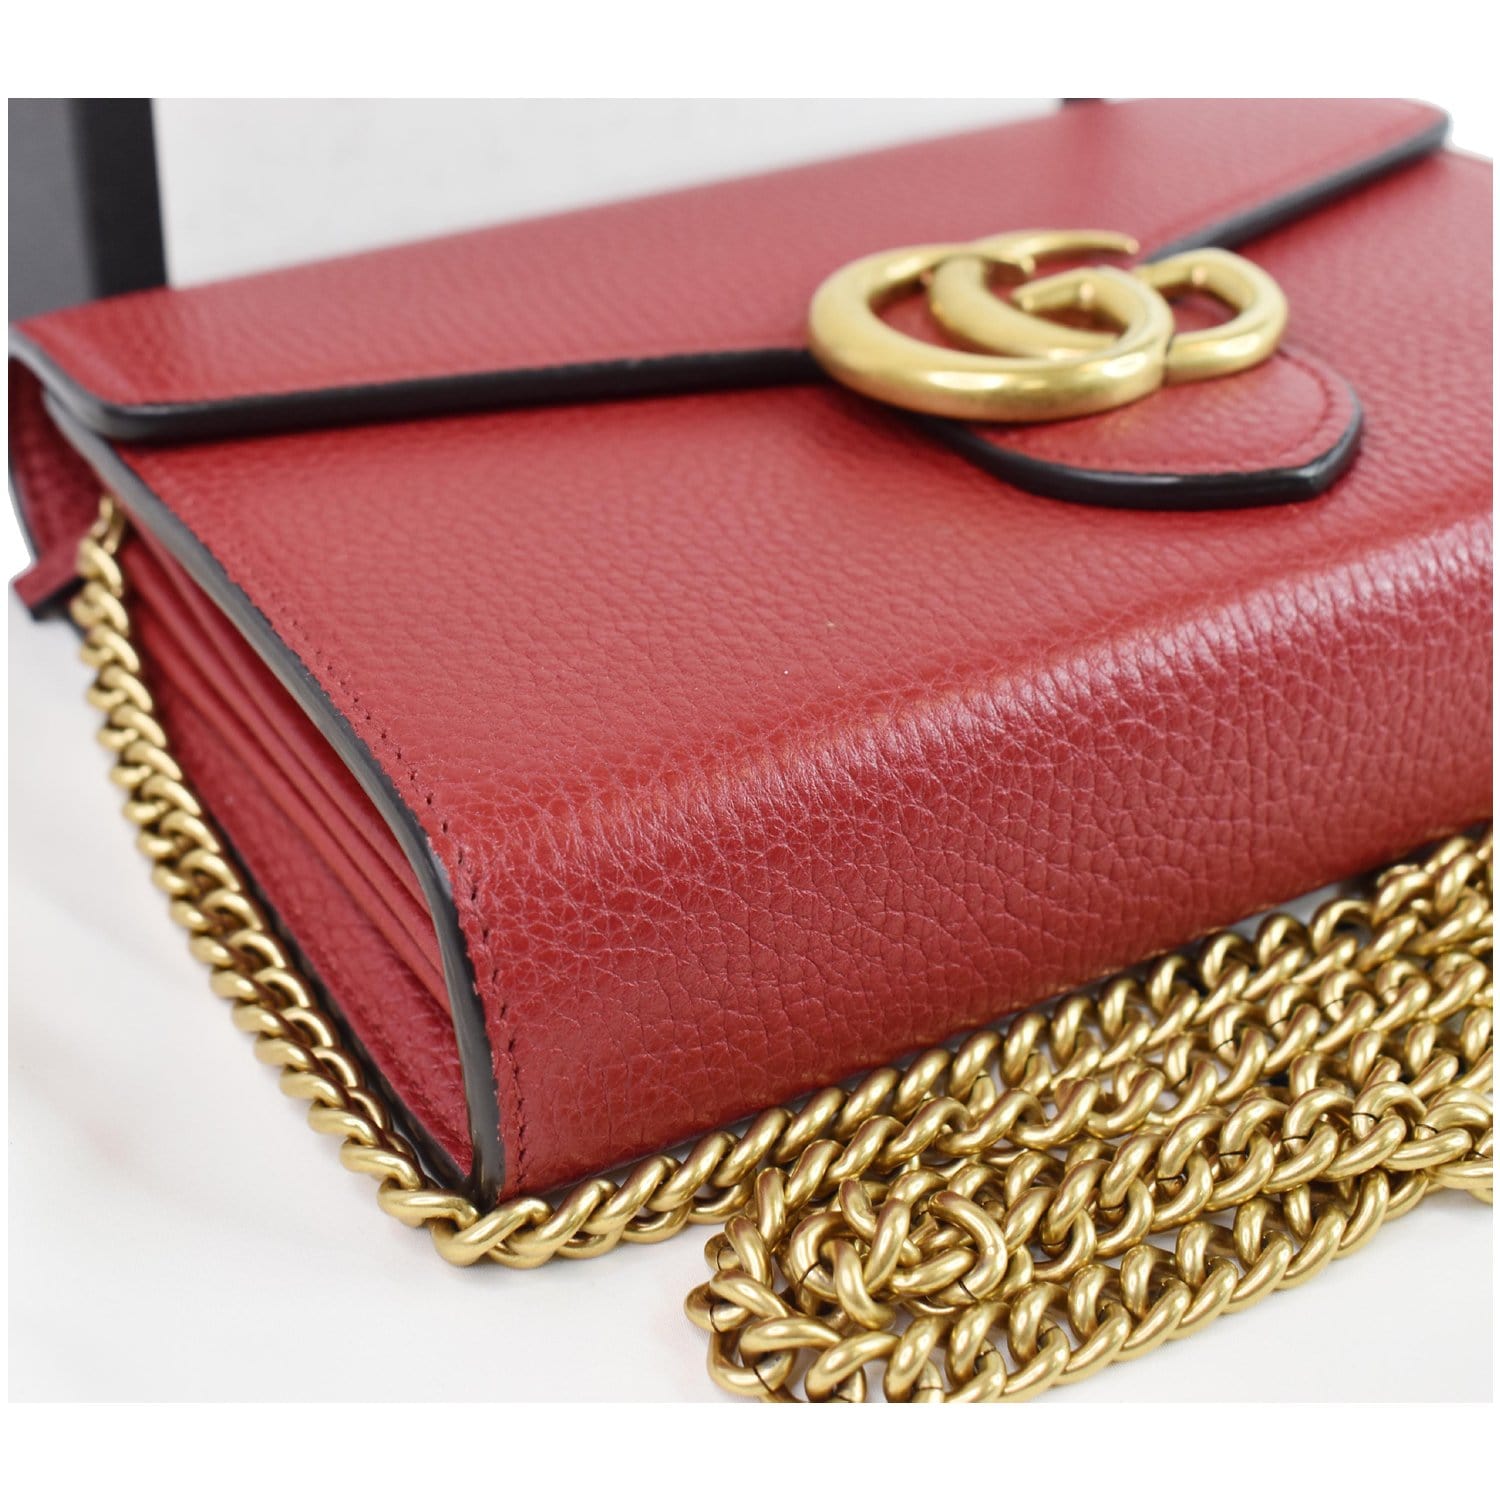 GG Marmont chain wallet